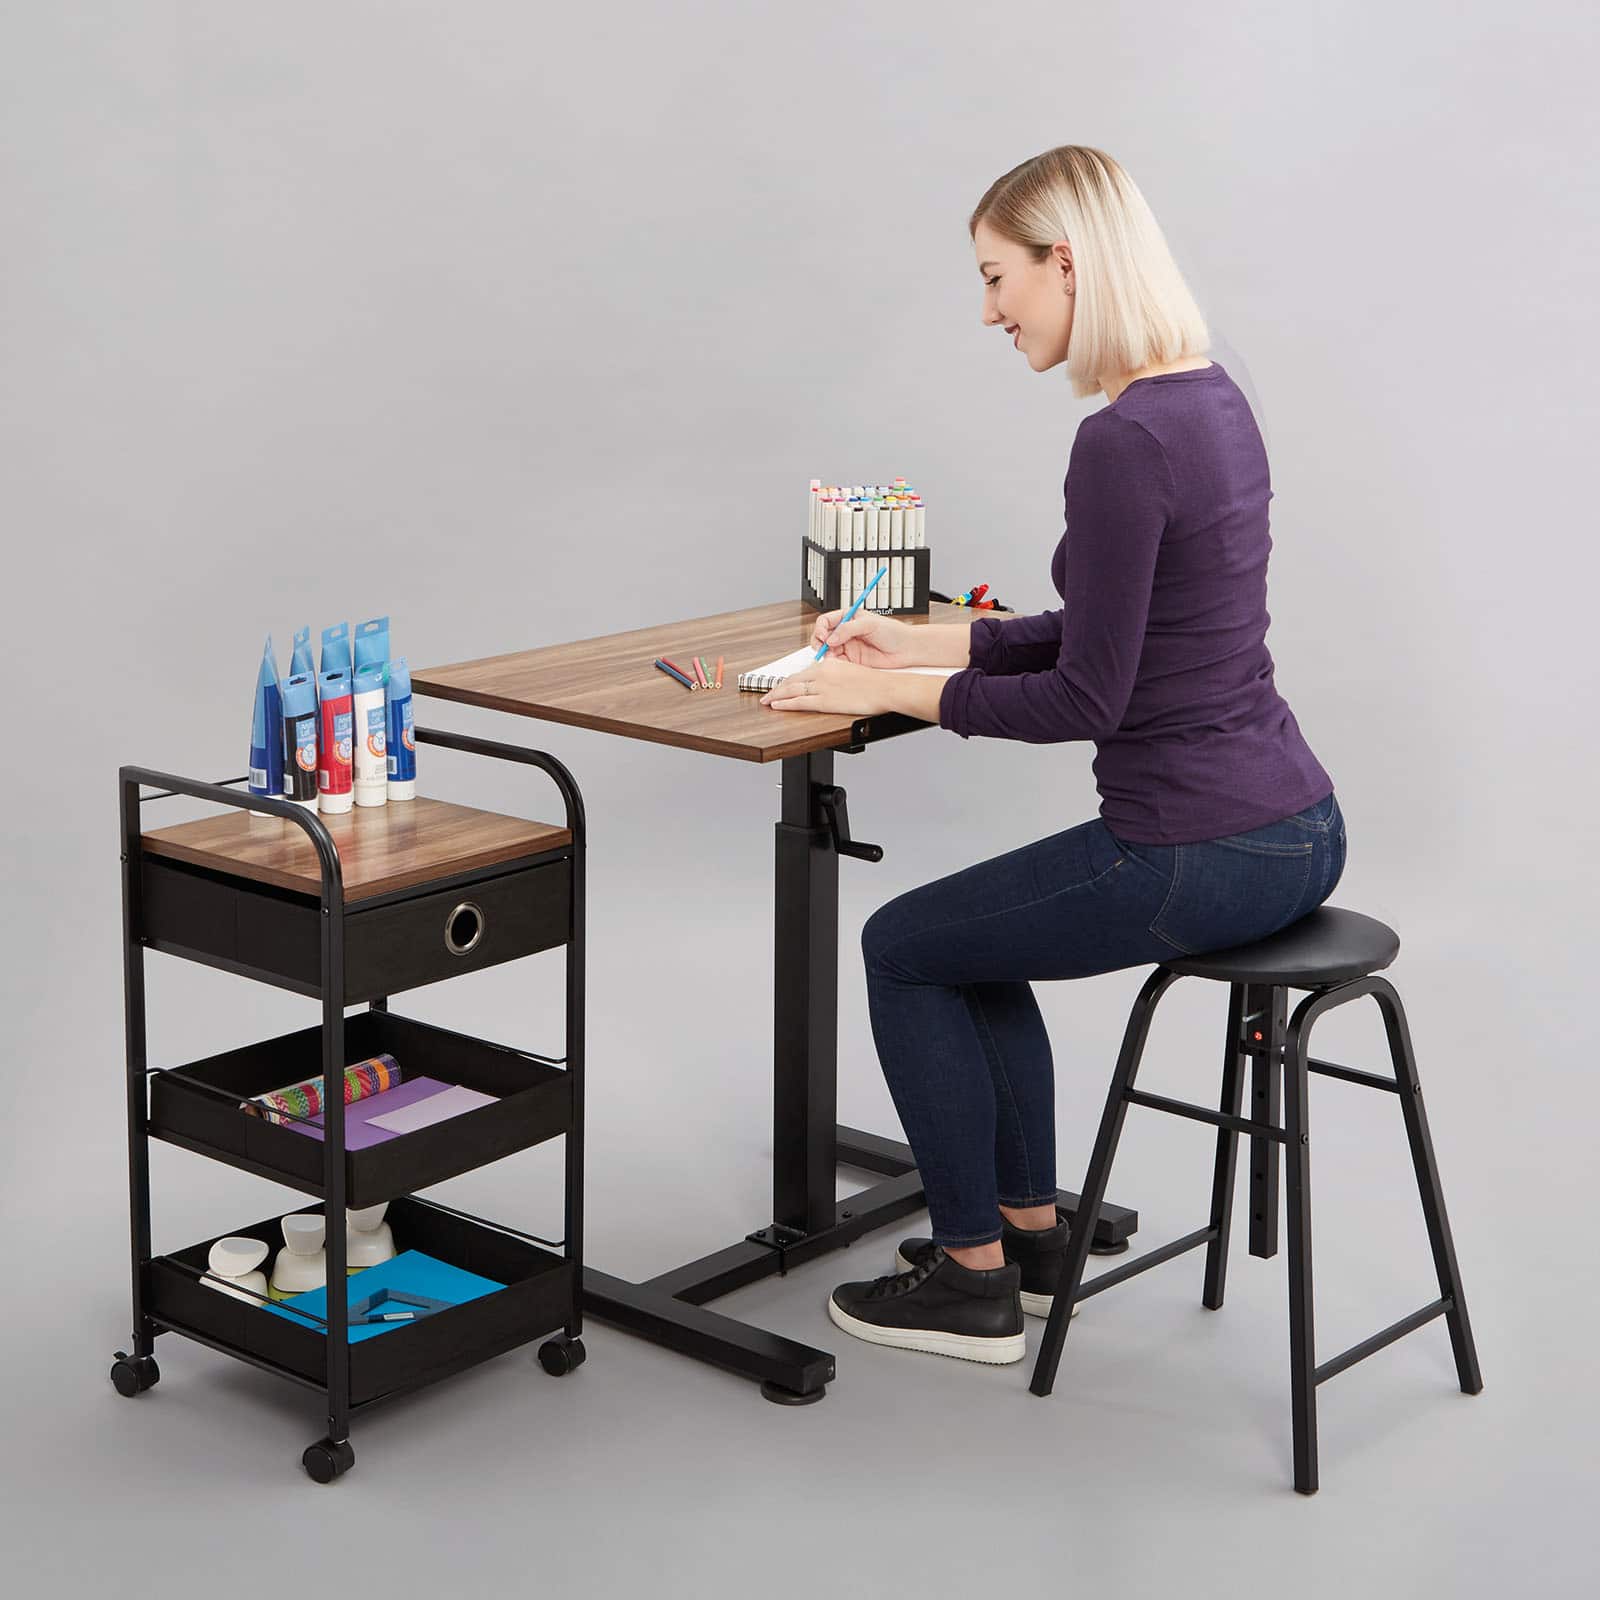 Shop For The Sit Stand Draft Table Set By Artist S Loft At Michaels